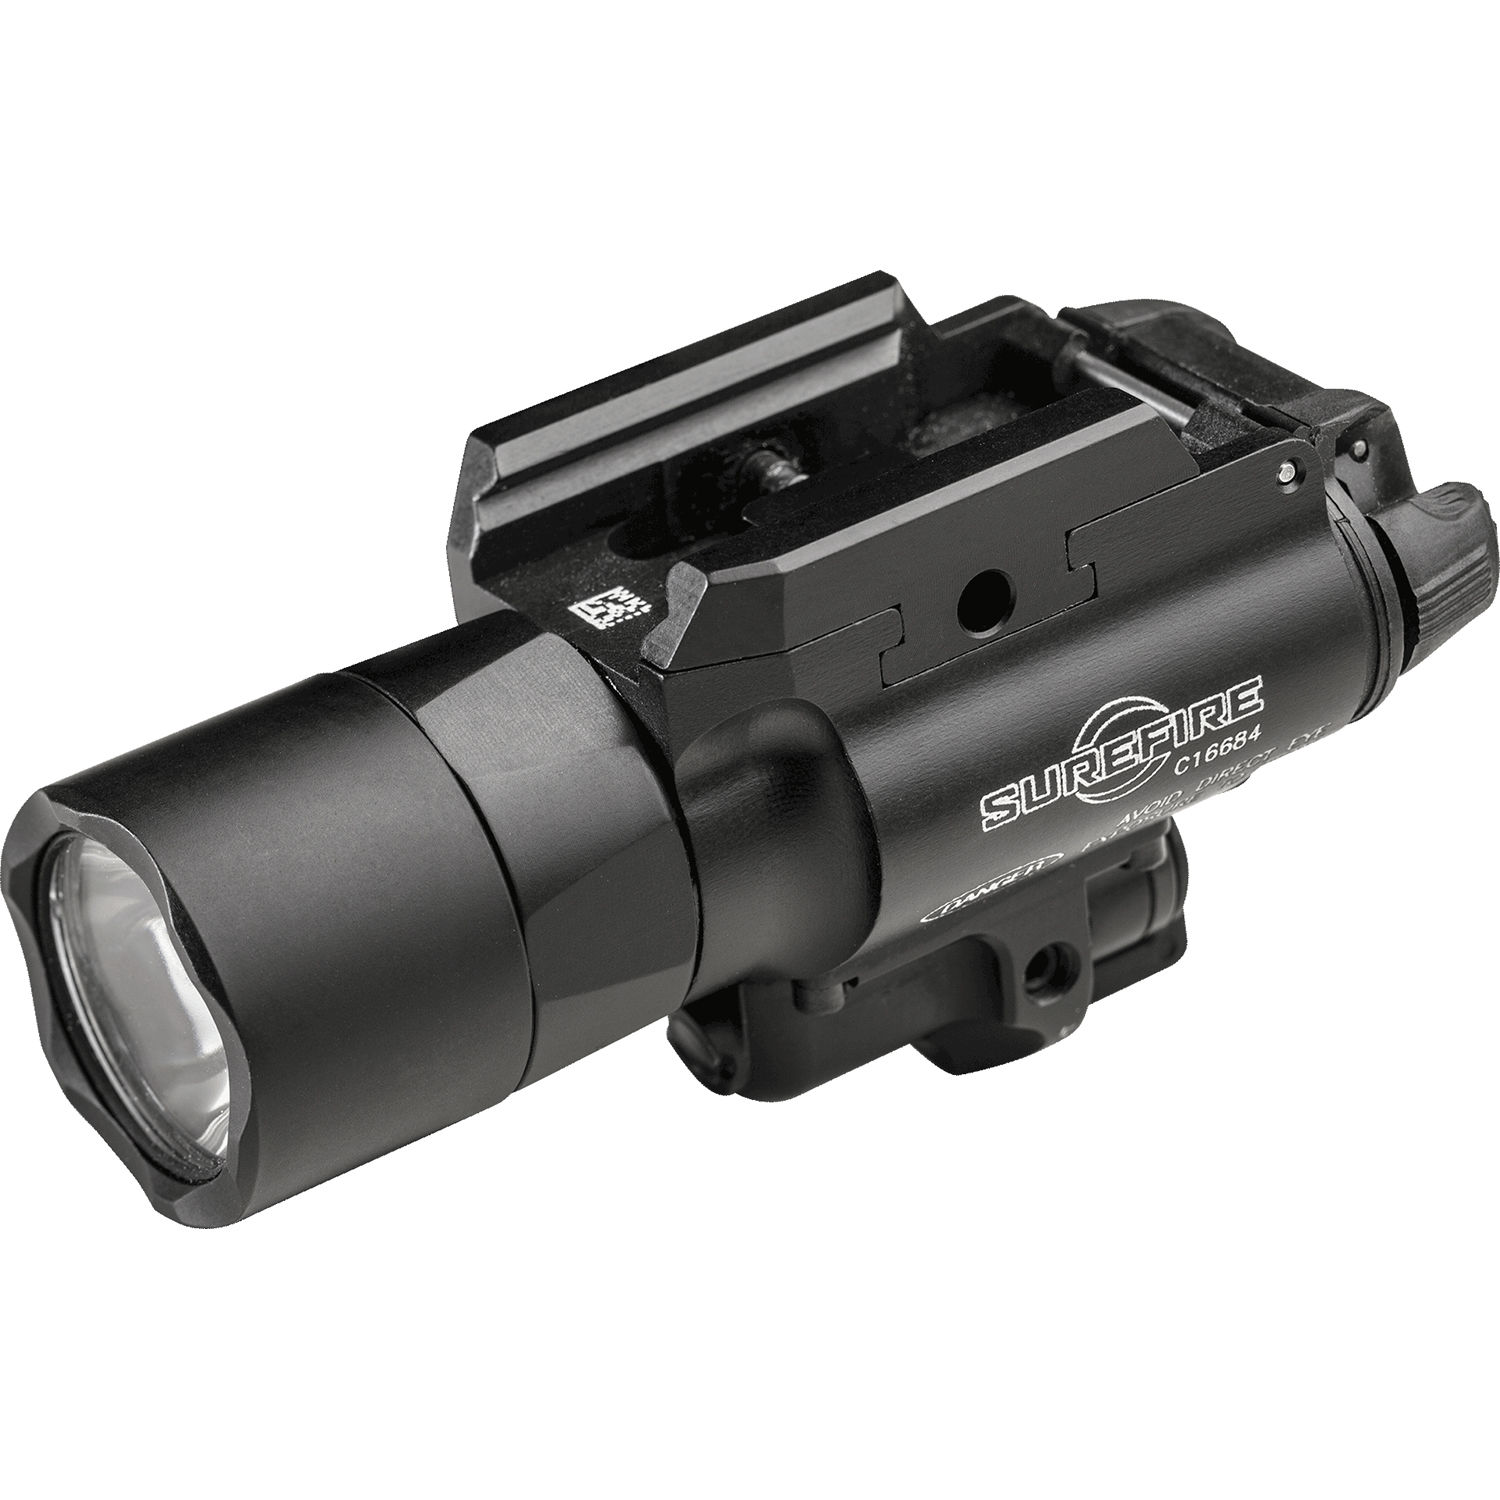 SureFire X400-A-RD Ultra LED Weapon Light with Red Aiming Laser 